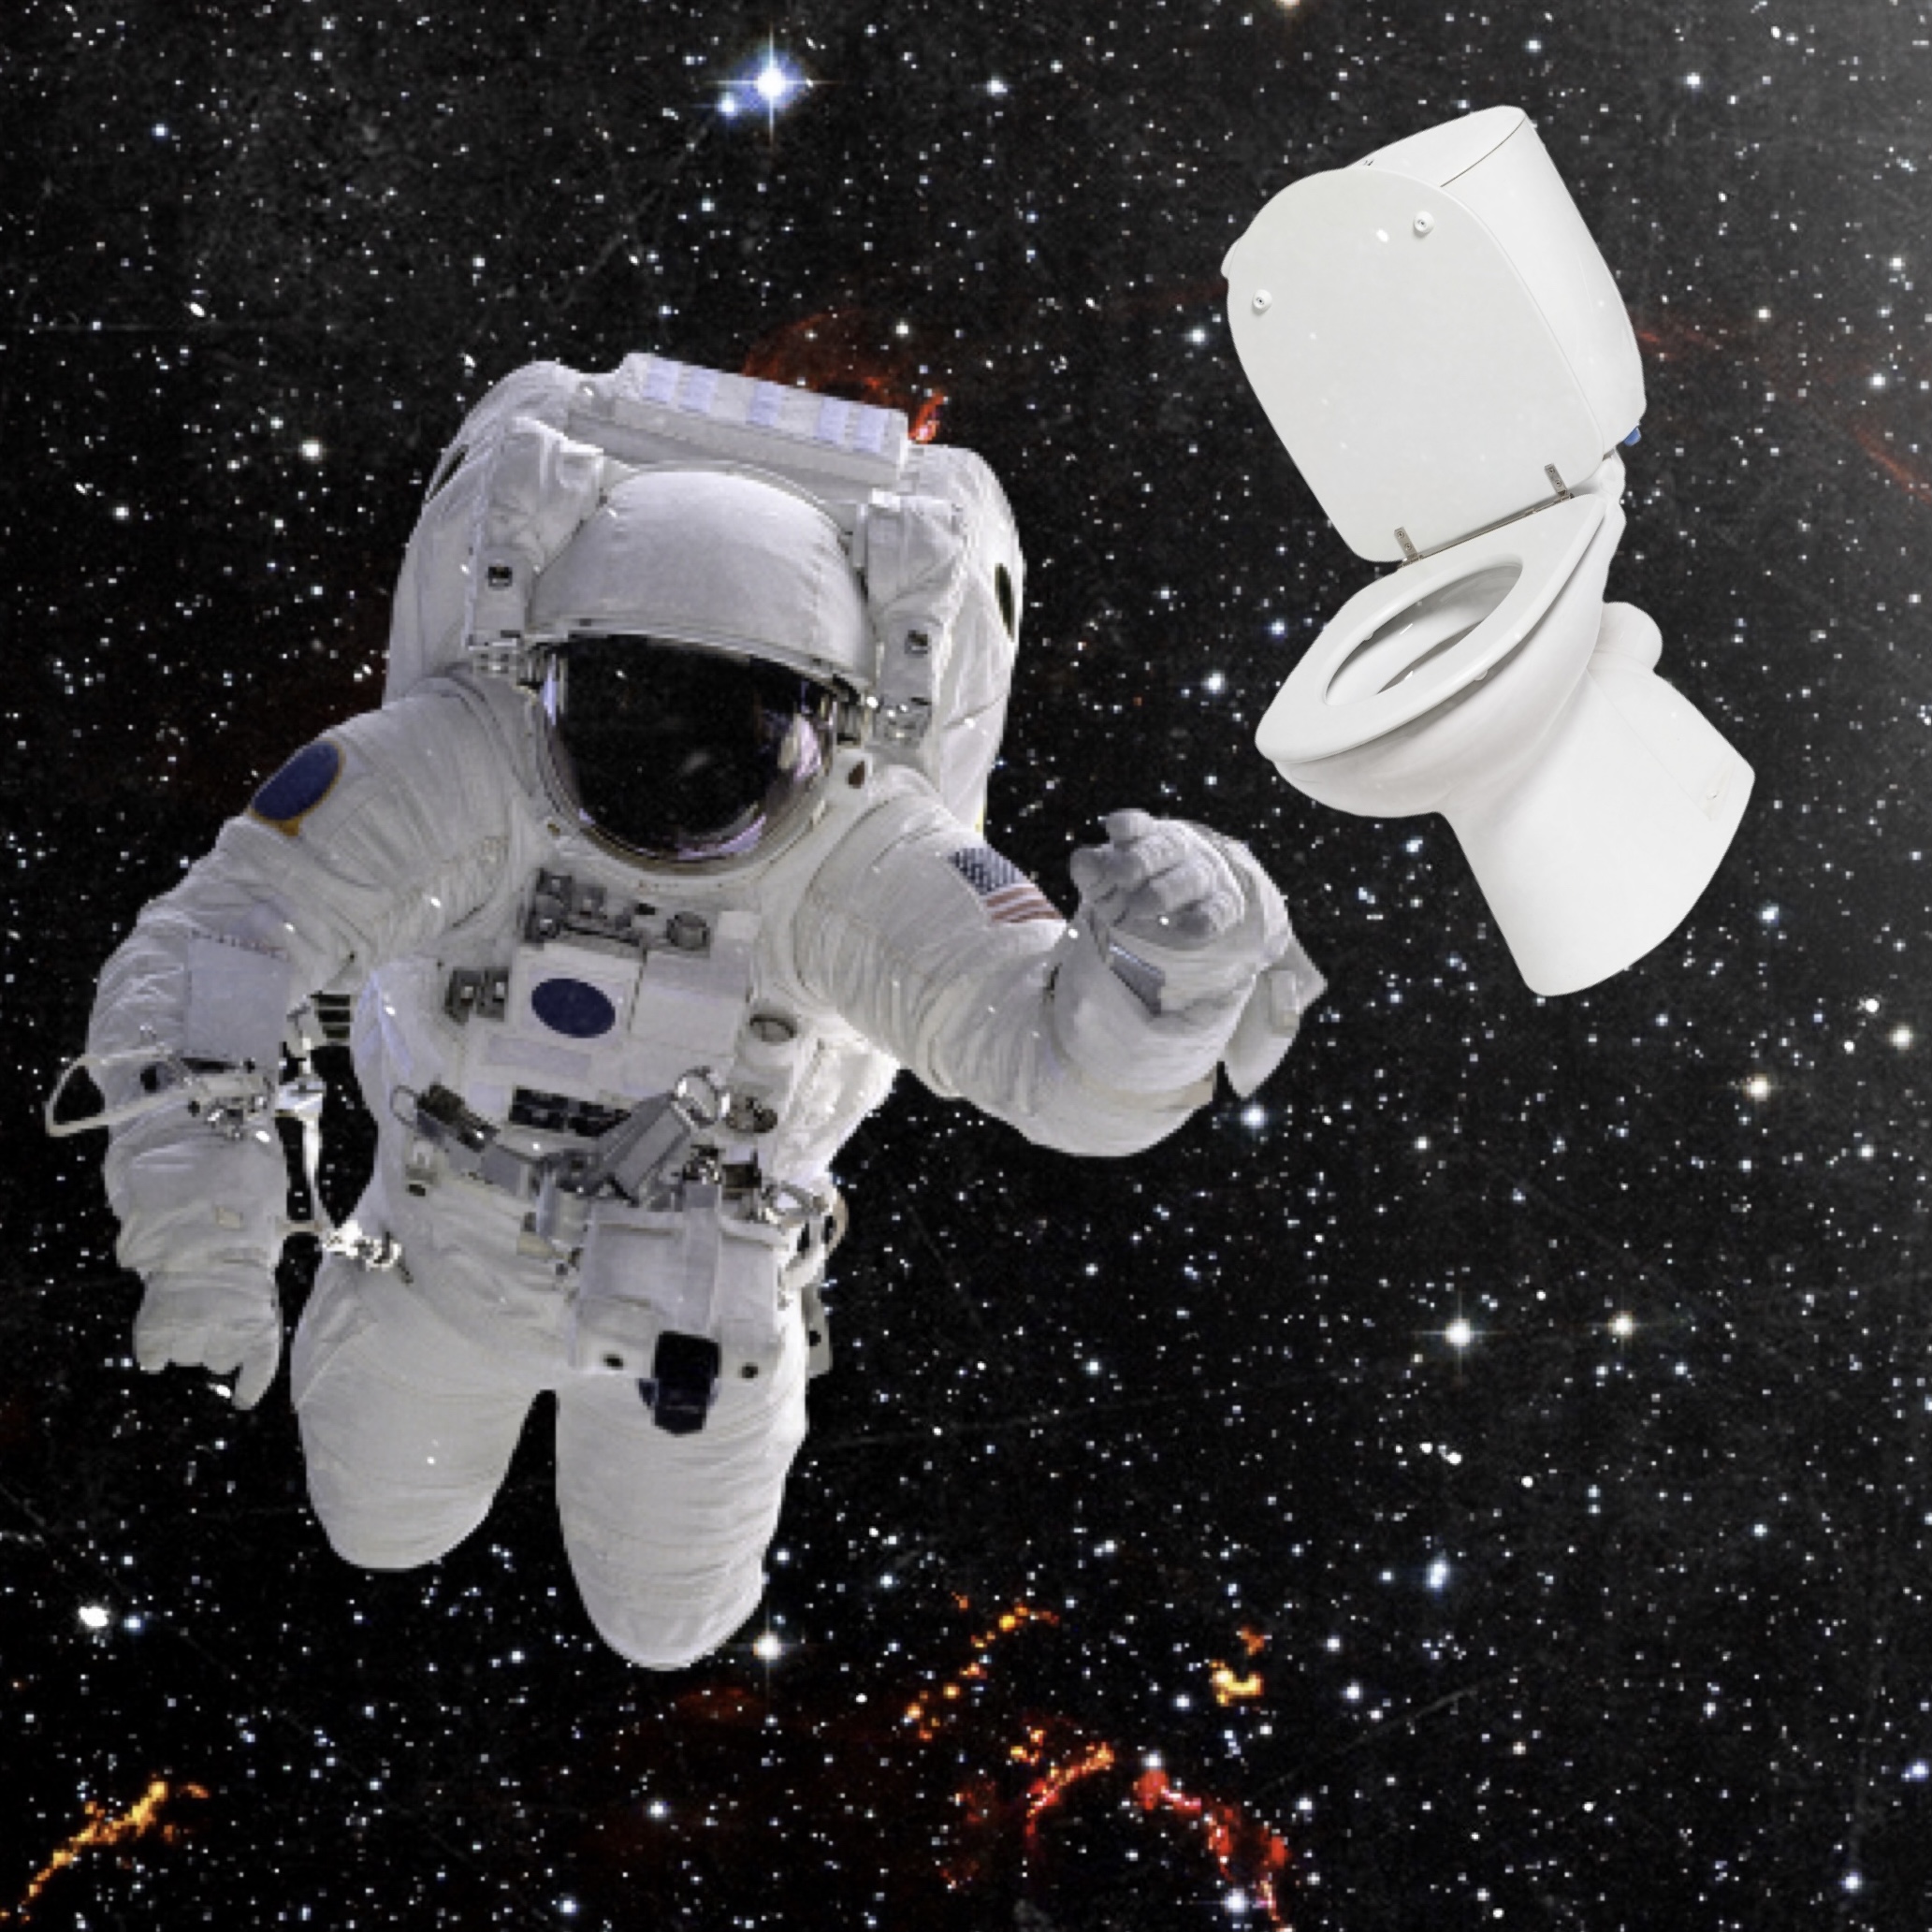 Read full post: Another Space Toilet Episode